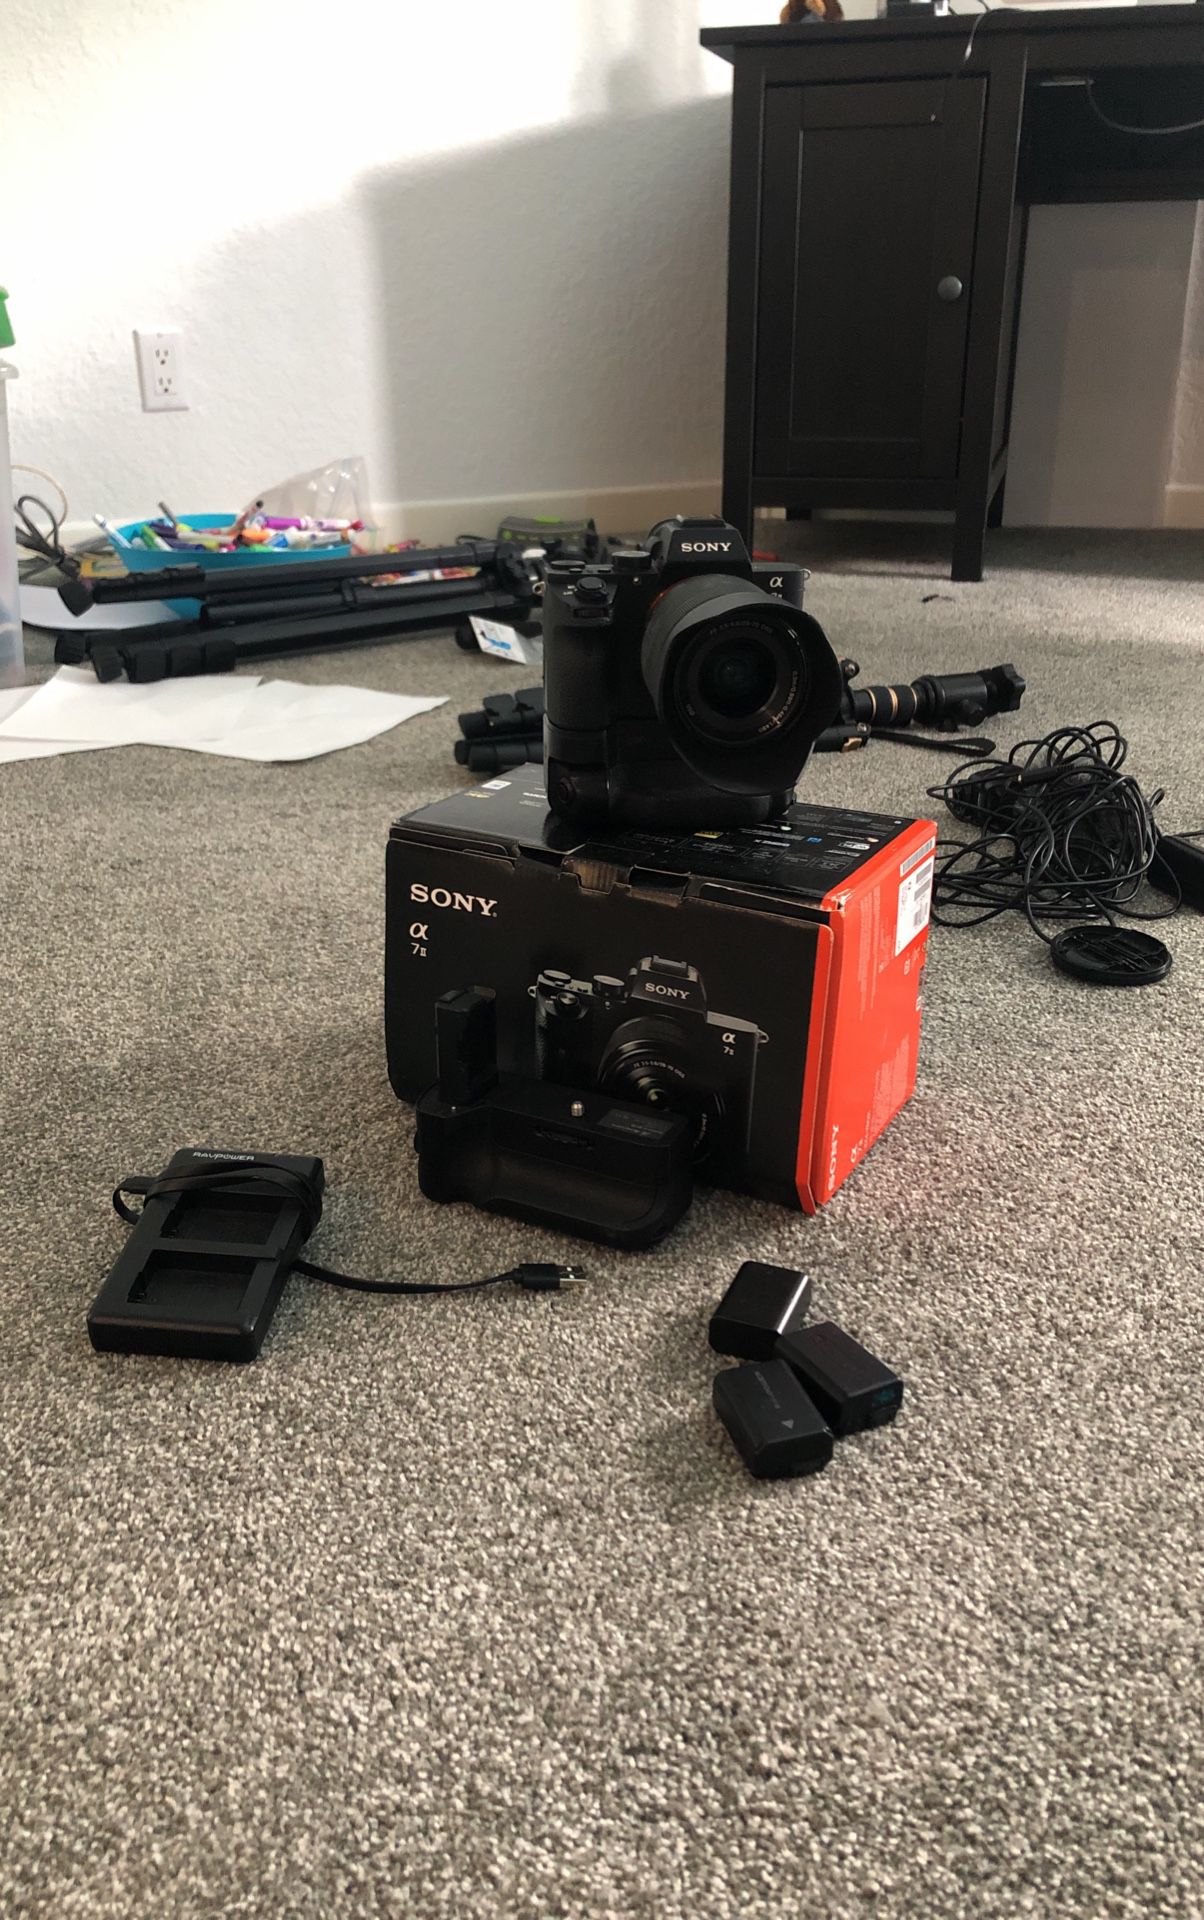 Sony A7ii with 2 battery grips, 4 batteries, and charger